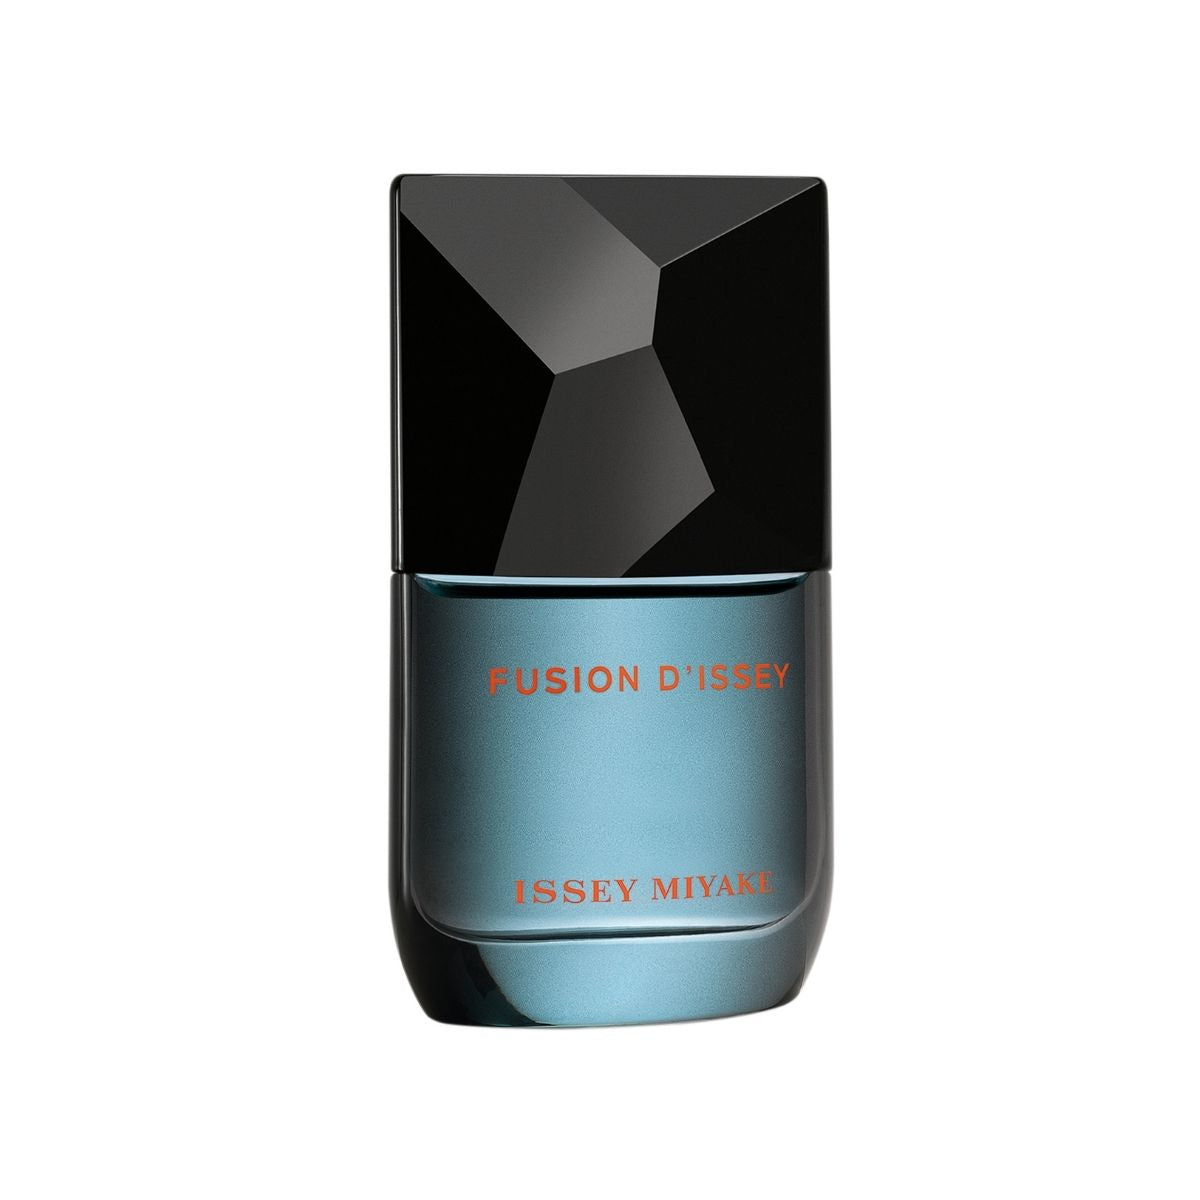 Issey Miyake Fusion D'Issey Pour Homme 50ml.